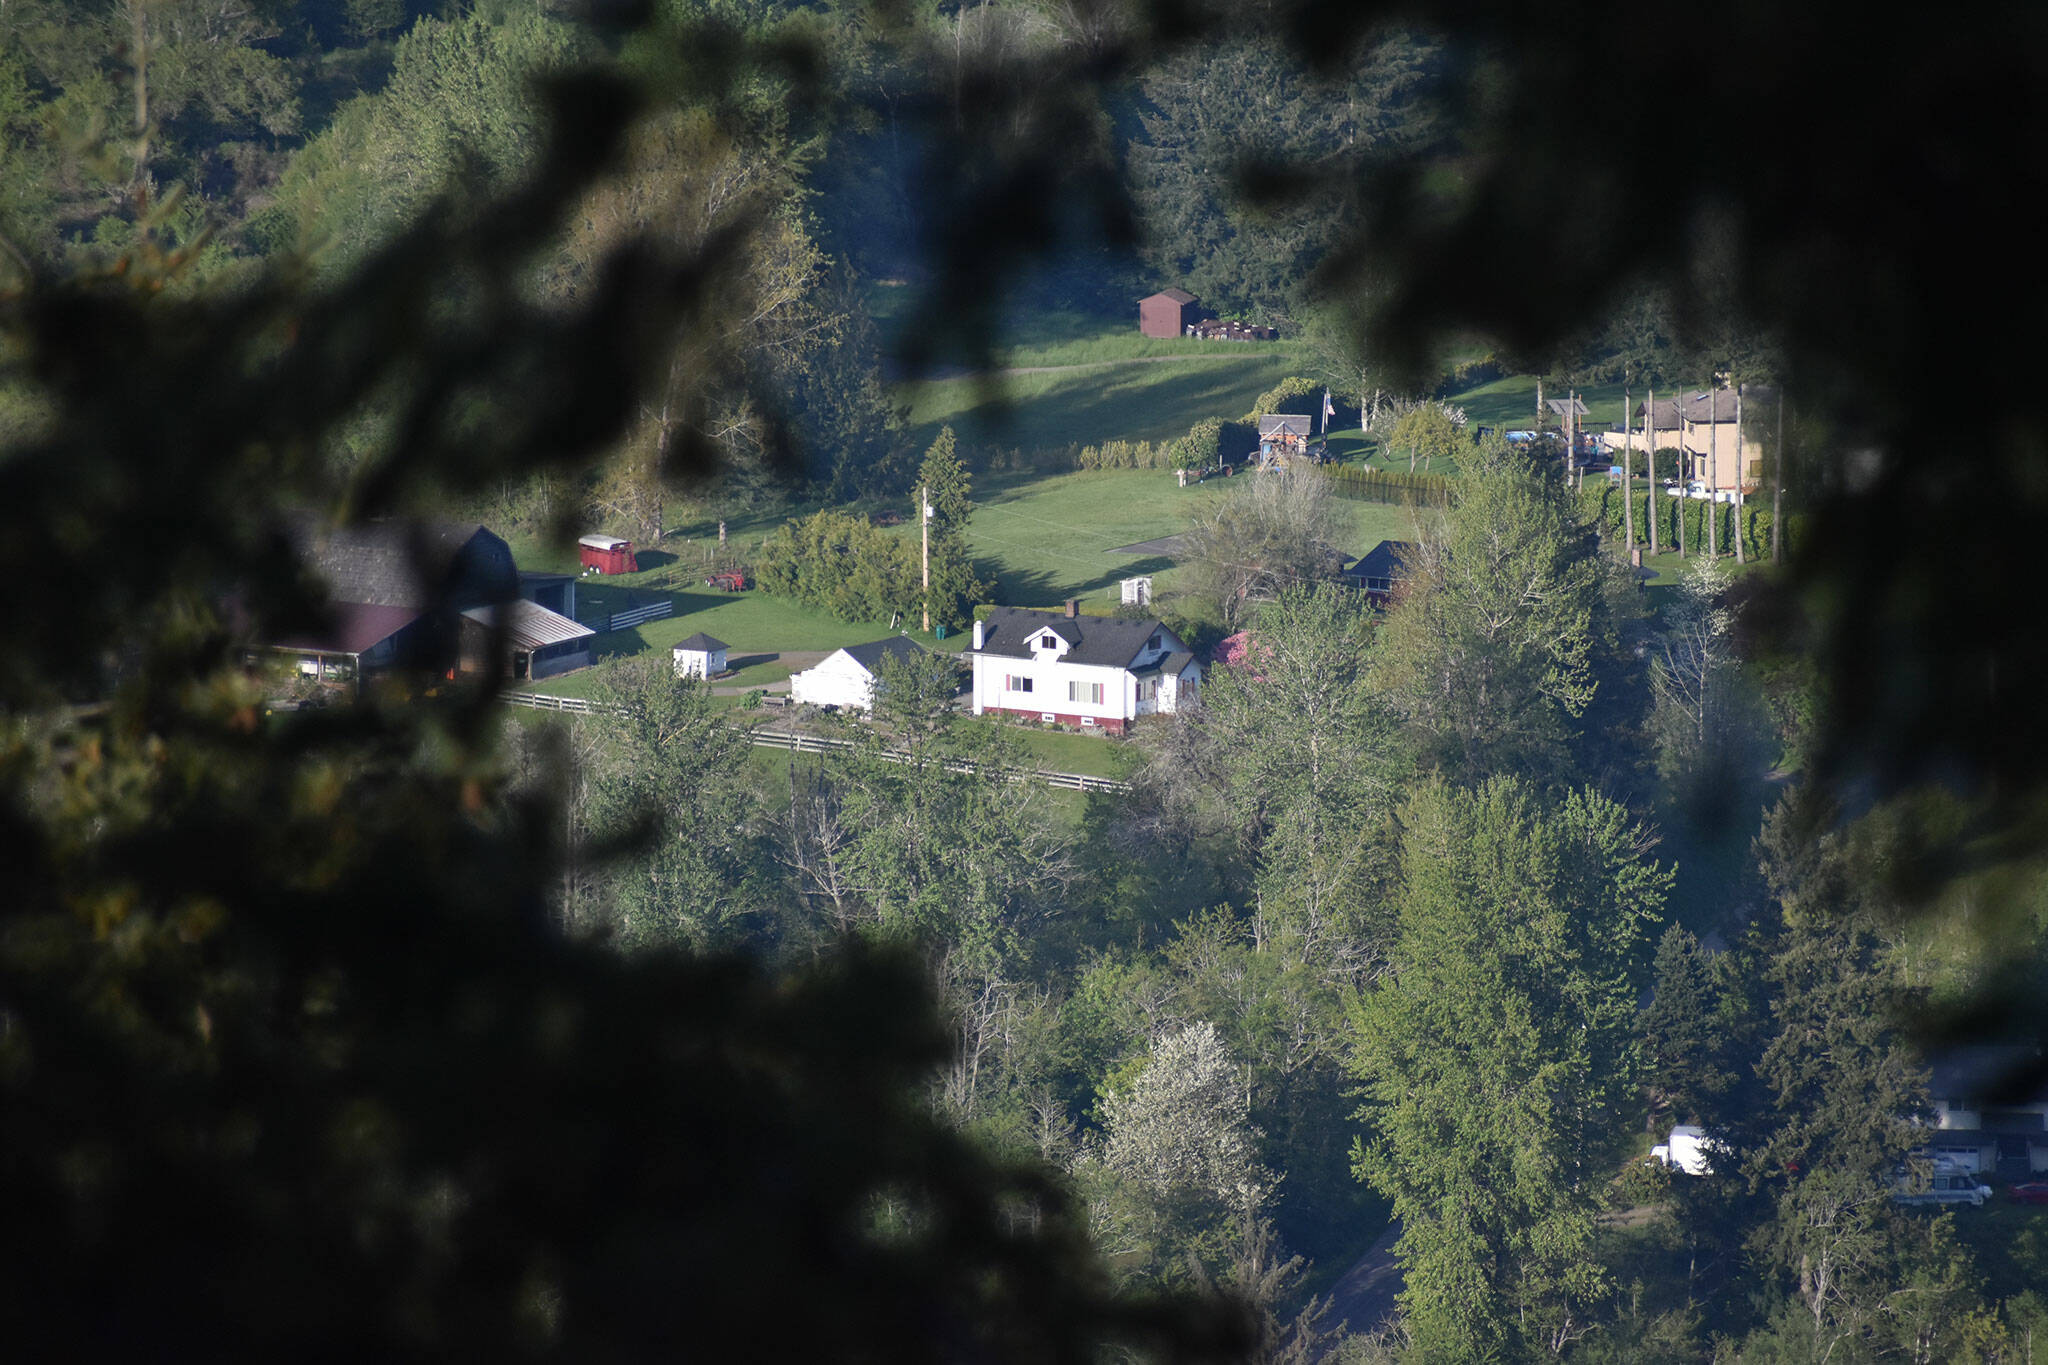 From the top of the Mt. Peak fire tower, this farmhouse peaks out through the foliage. Photo by Alex Bruell.